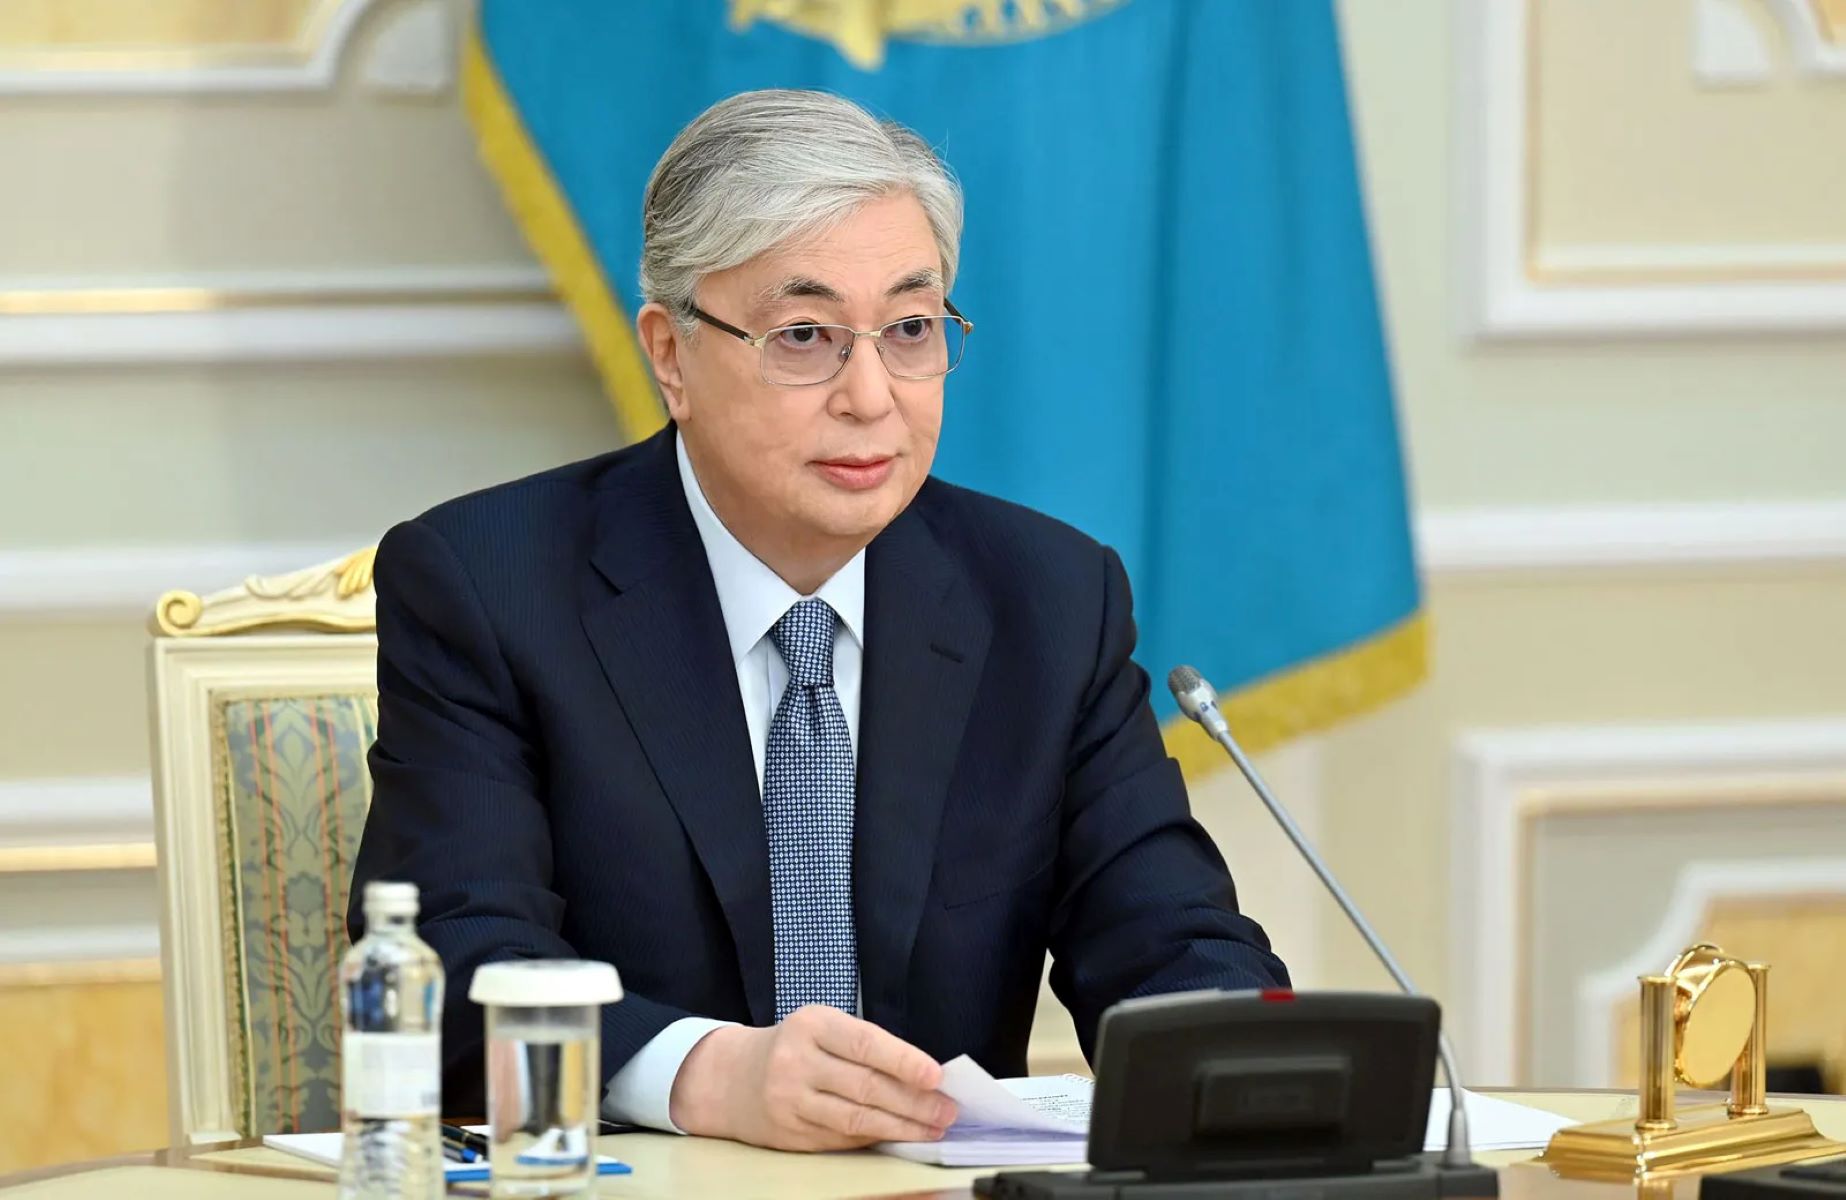 15-captivating-facts-about-kassym-jomart-tokayev